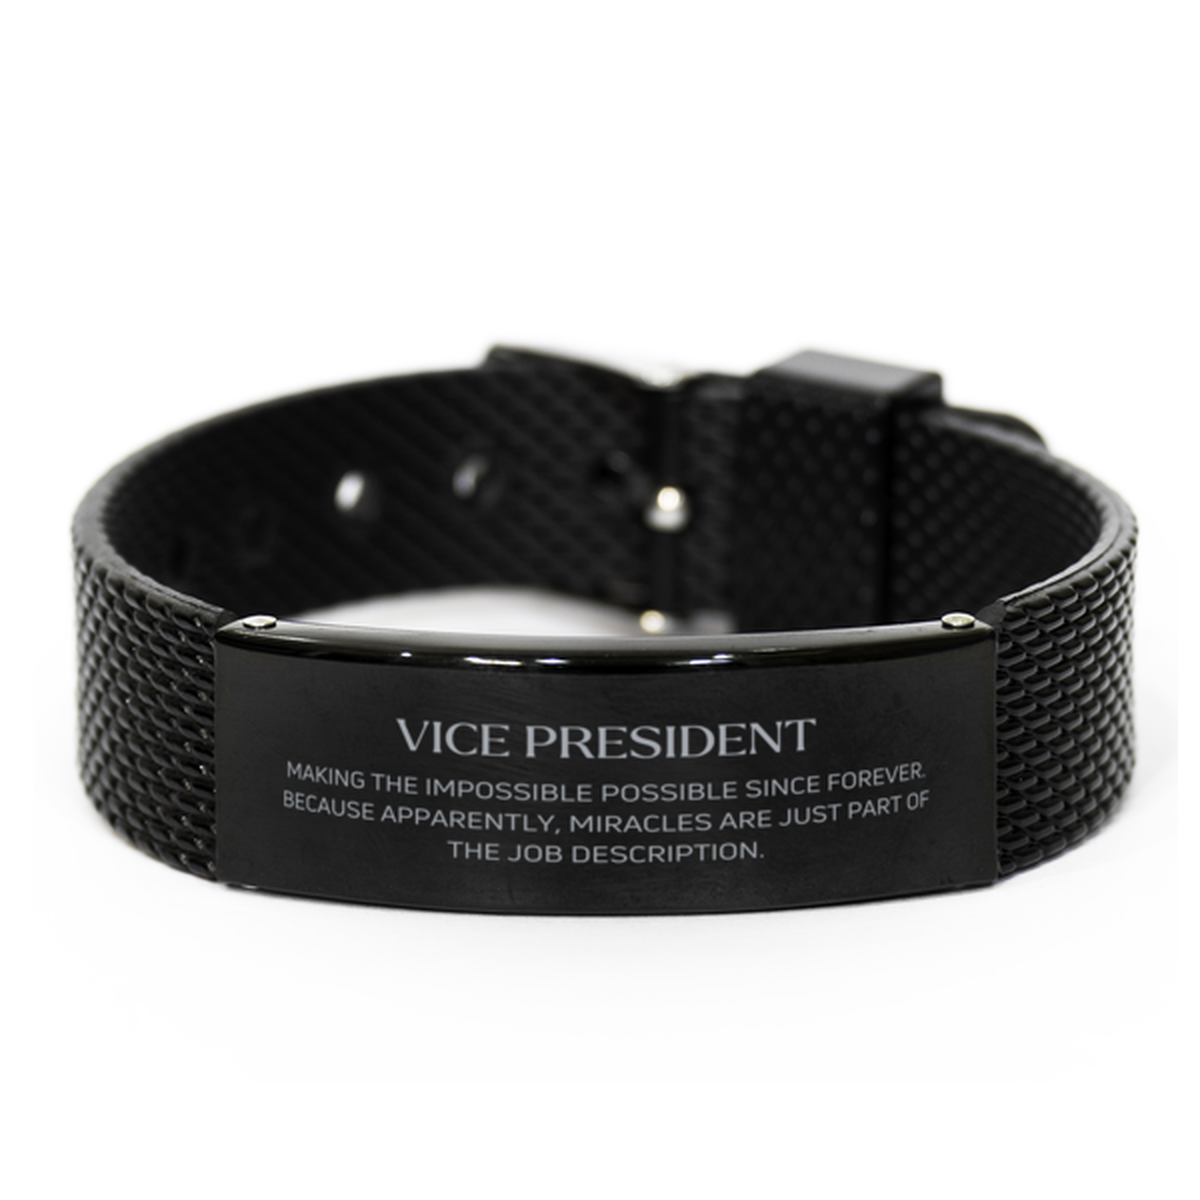 Funny Vice President Gifts, Miracles are just part of the job description, Inspirational Birthday Black Shark Mesh Bracelet For Vice President, Men, Women, Coworkers, Friends, Boss